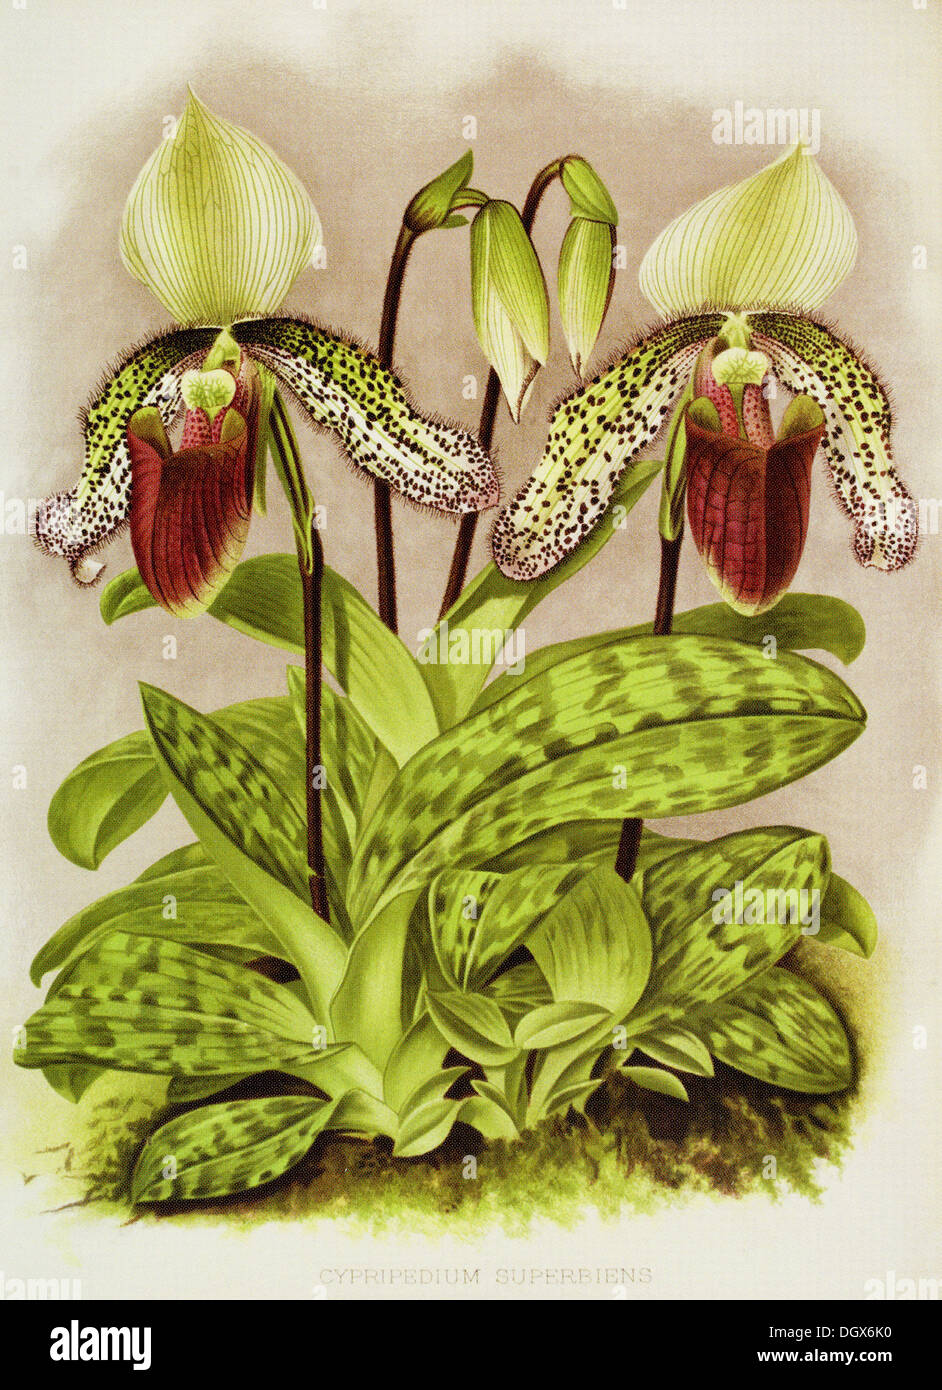 Orchids, Cypripedium Superbiens - by John N. Fitch, 1897 Stock Photo